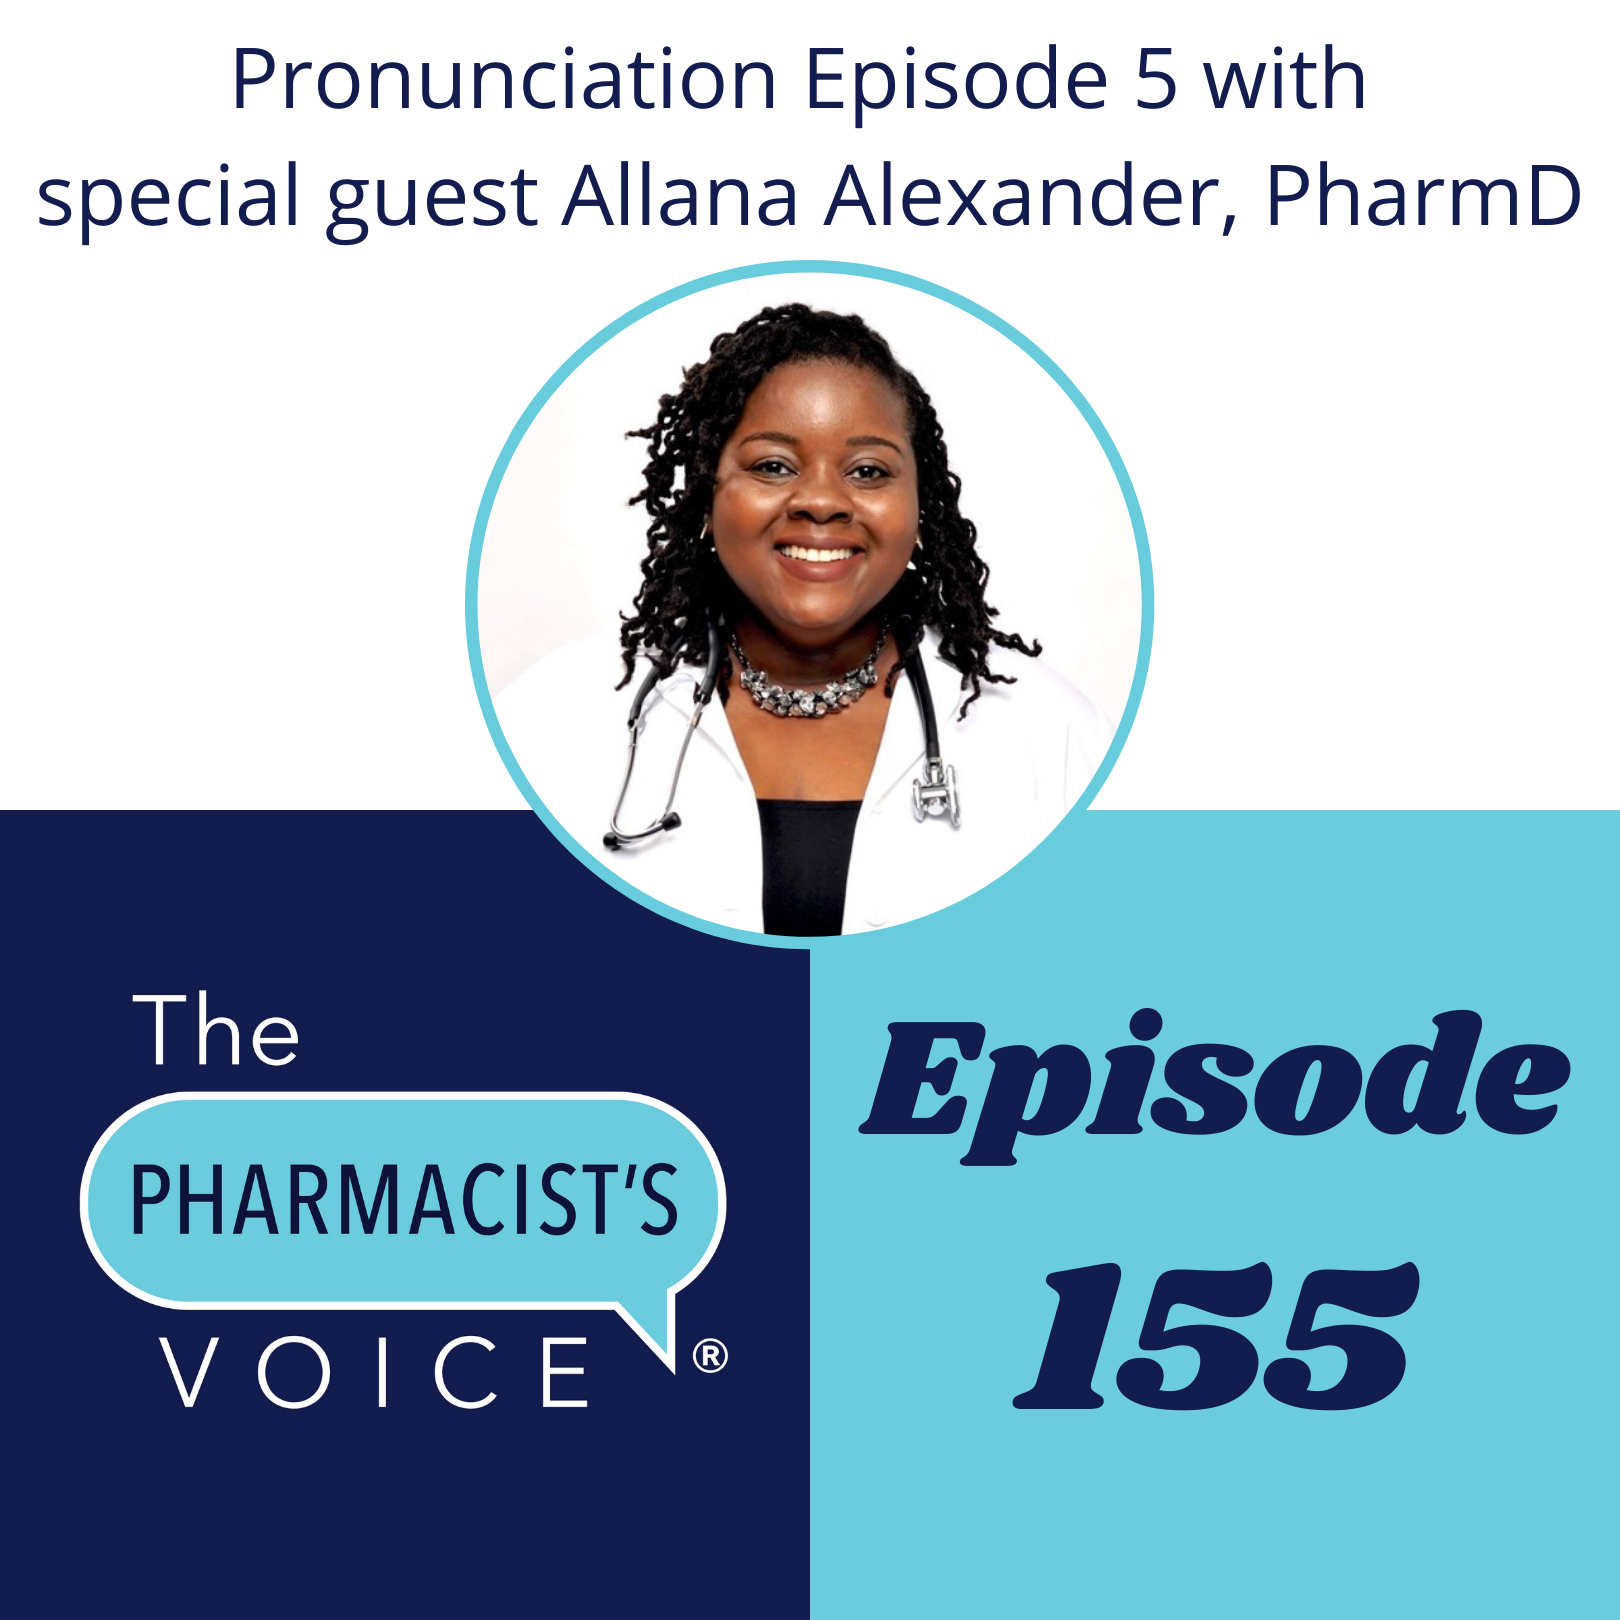 Episode artwork for The Pharmacist's Voice Podcast episode 155 featuring Dr. Allana Alexander. To learn more about The Pharmacist's Voice Podcast, visit www.thepharmacistsvoice.com